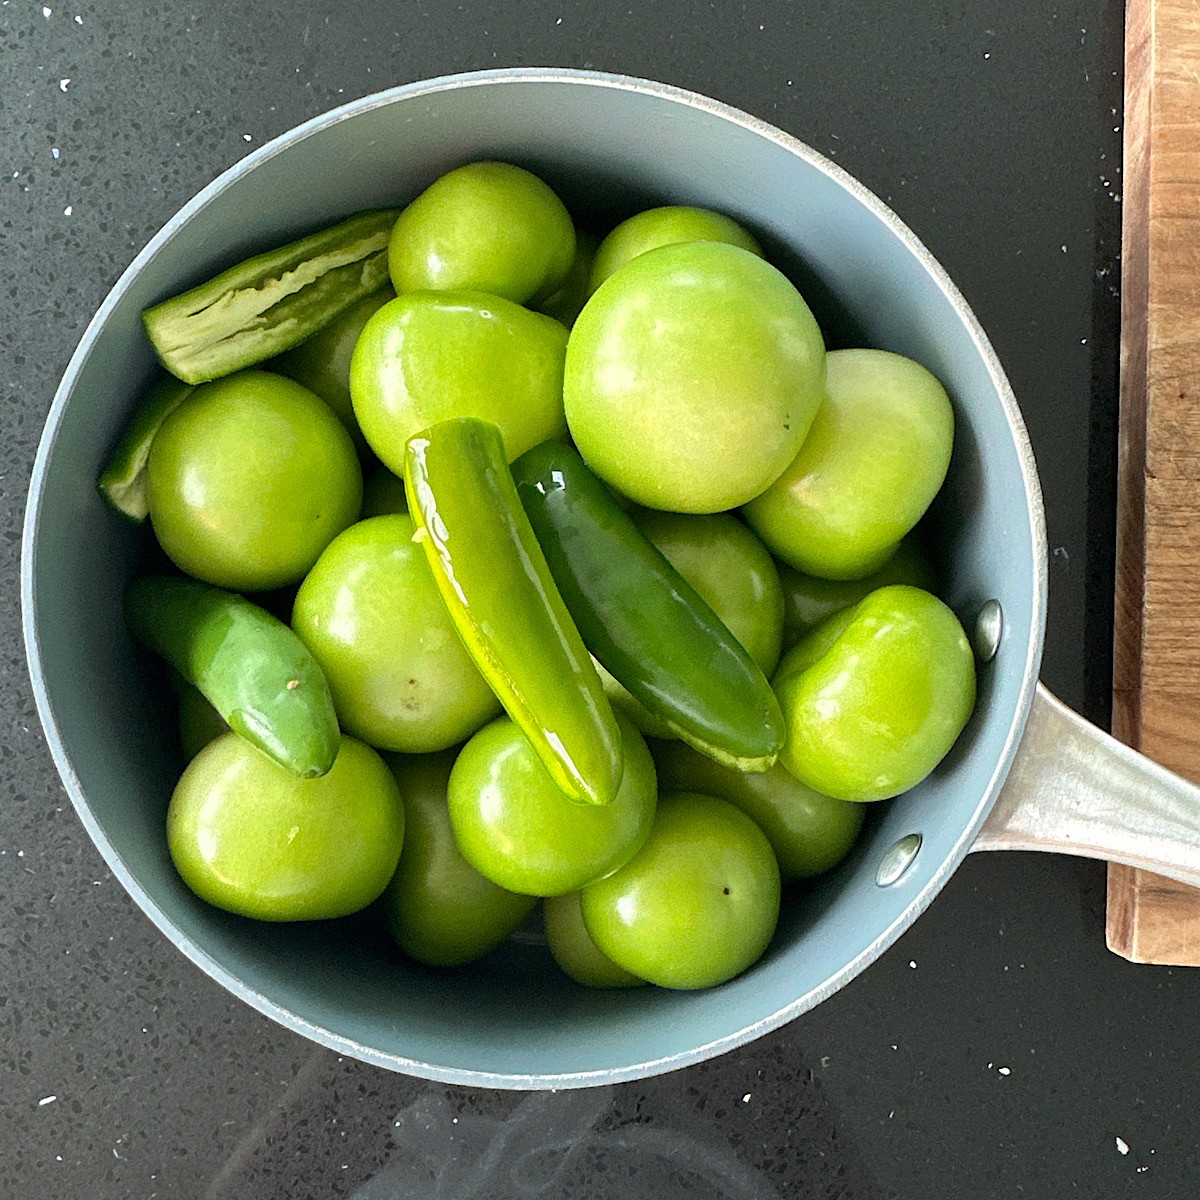 Tomatillos and serrano peppers in a pot of wate on stovetop..